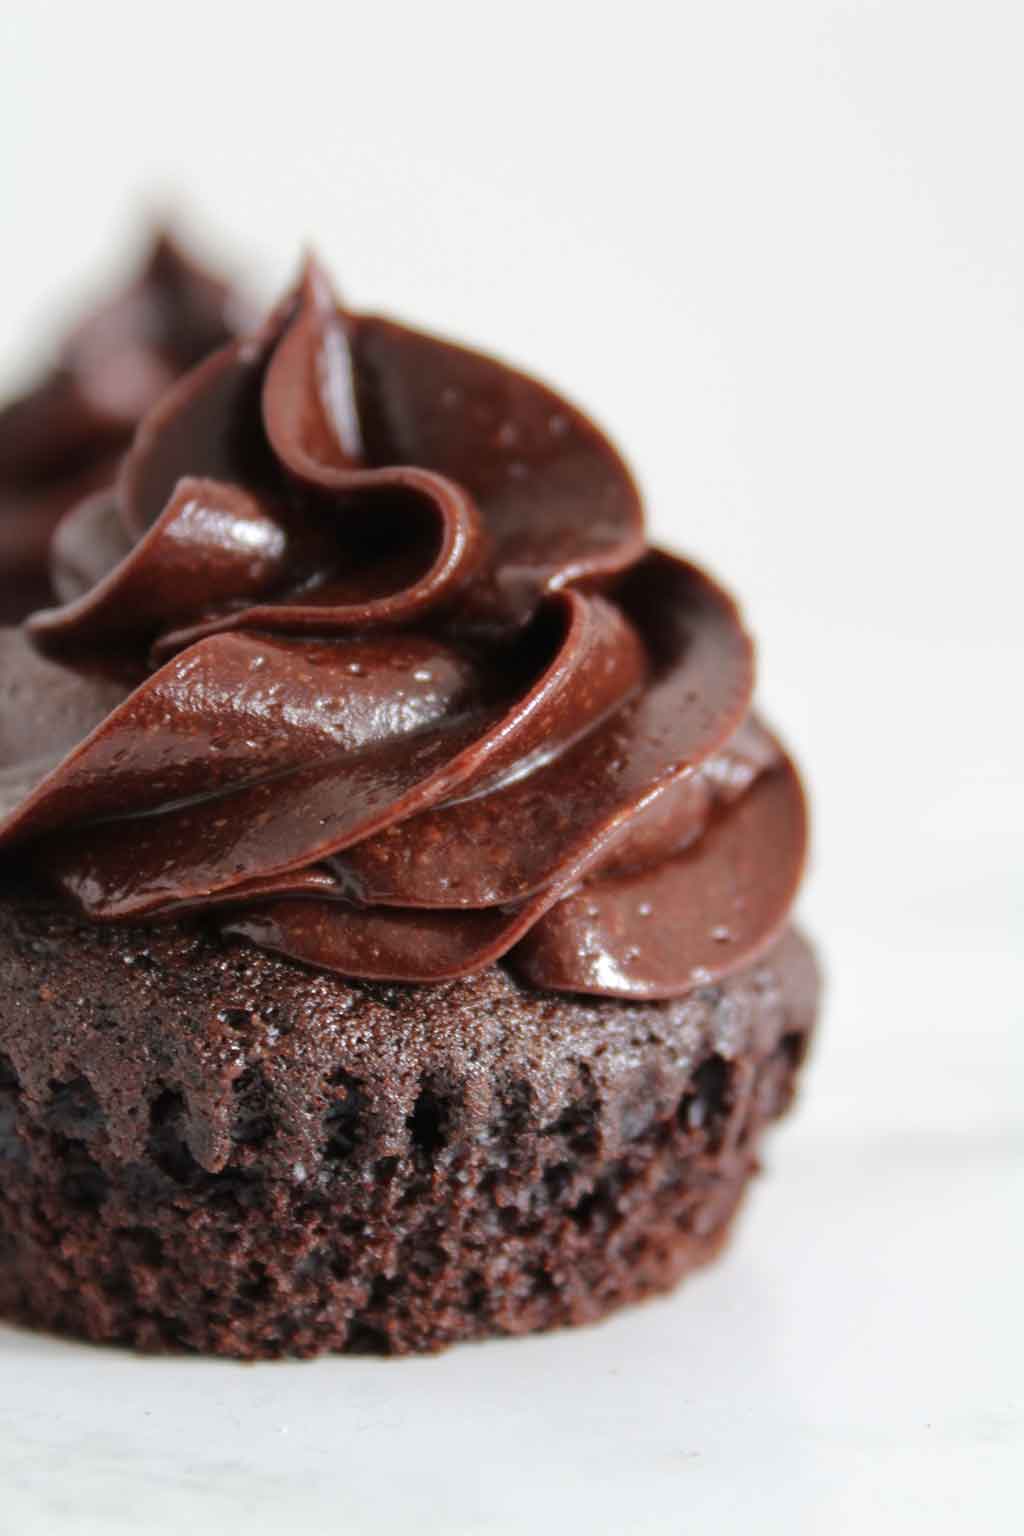 a vegan chocolate cupcake with chocolate frosting on top